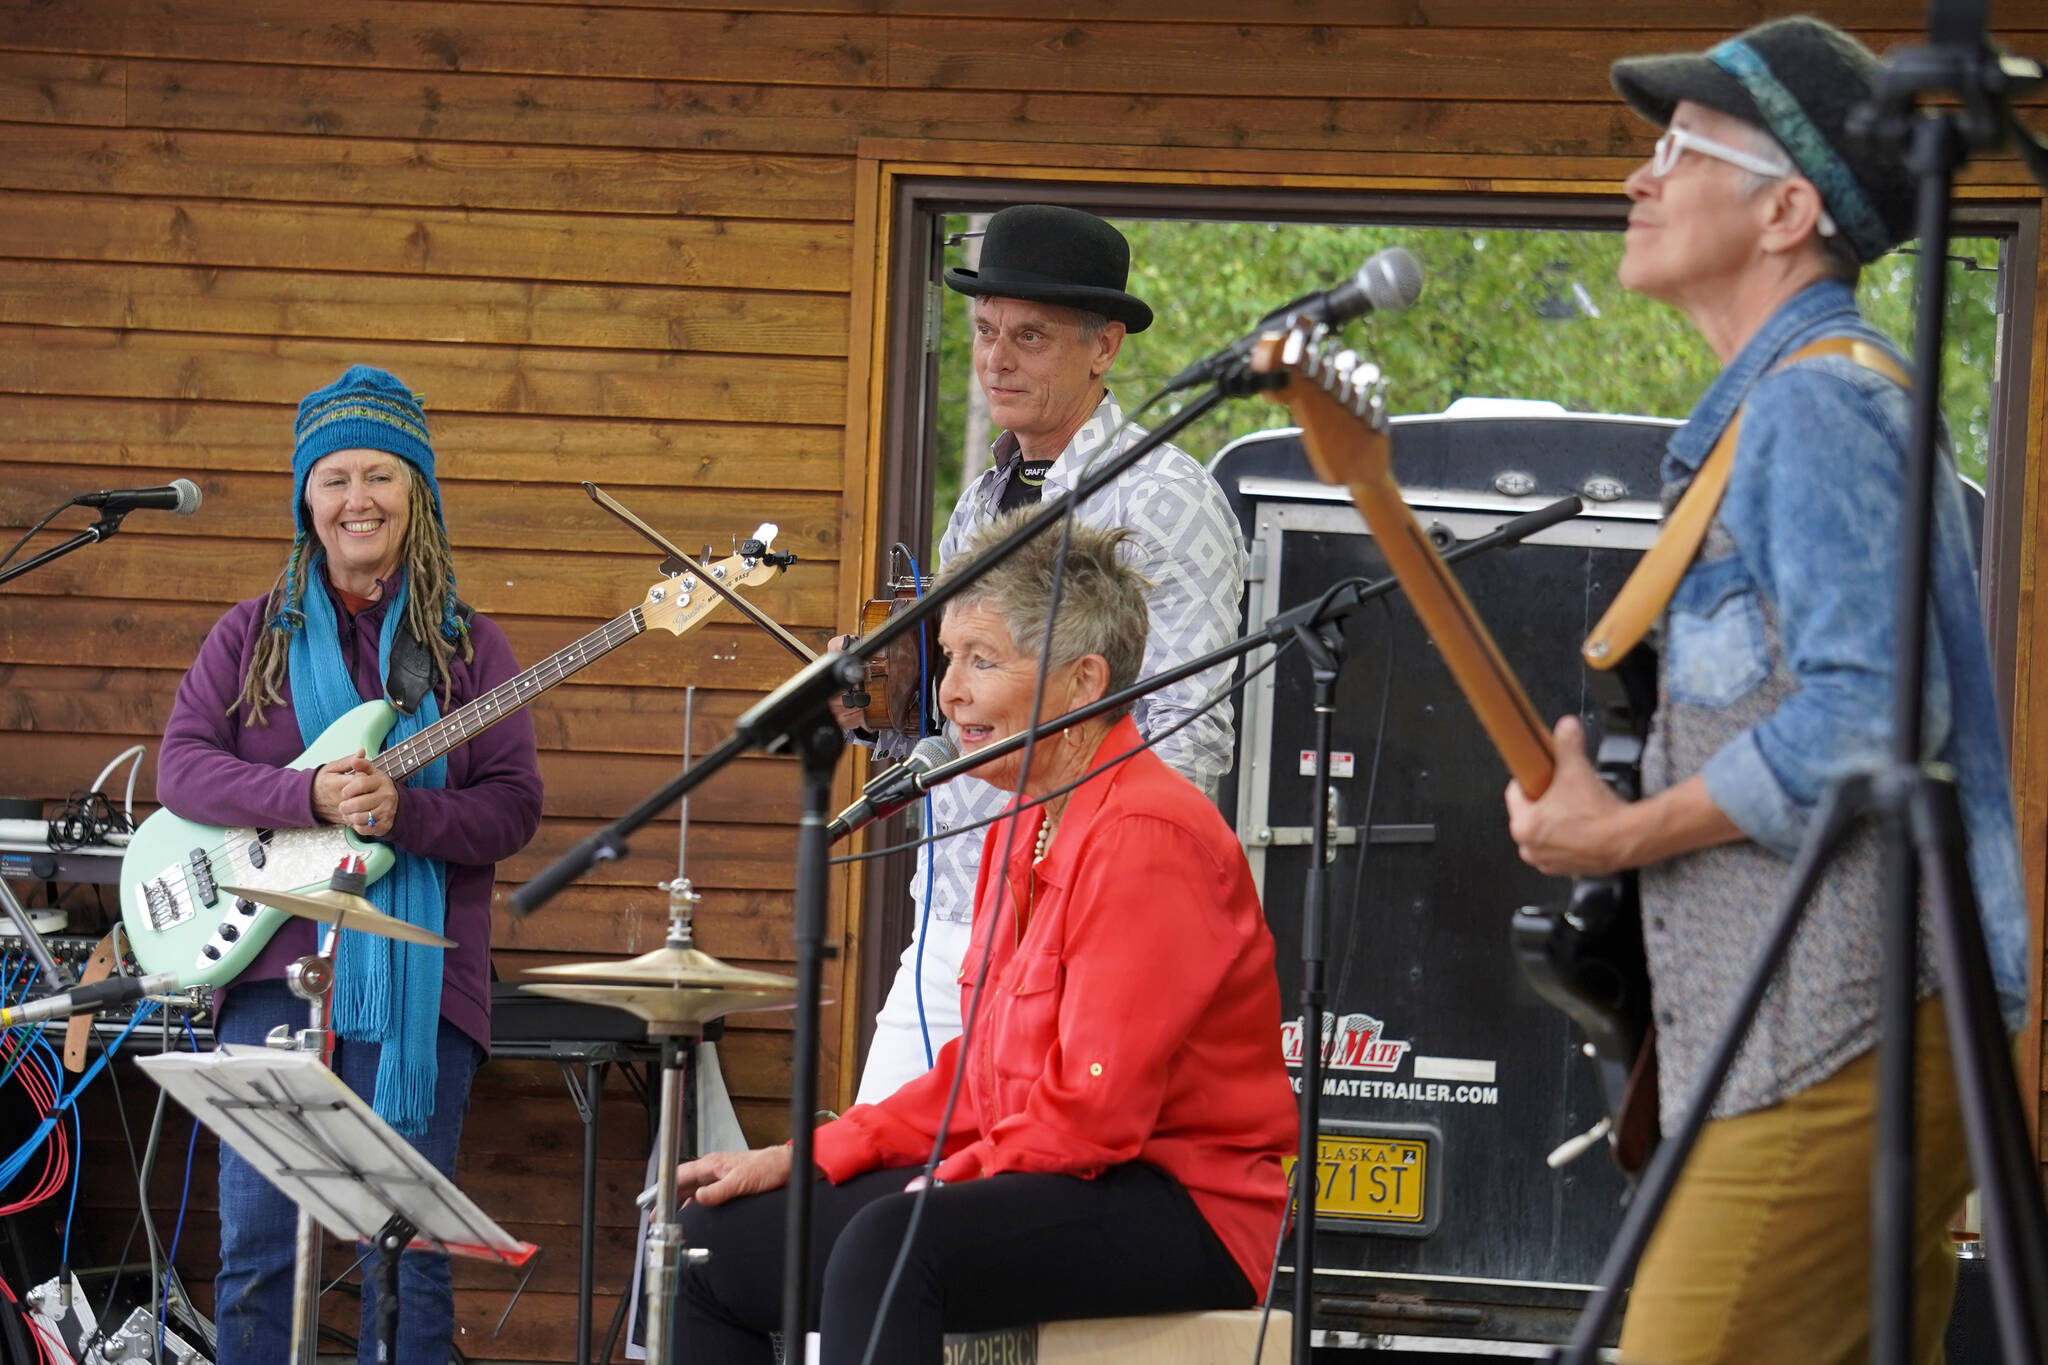 Connie Brannock’s Tiny House of Funk performs during the Soldotna Music Series at Soldotna Creek Park in Soldotna, Alaska, on Wednesday, June 21, 2023. (Jake Dye/Peninsula Clarion)